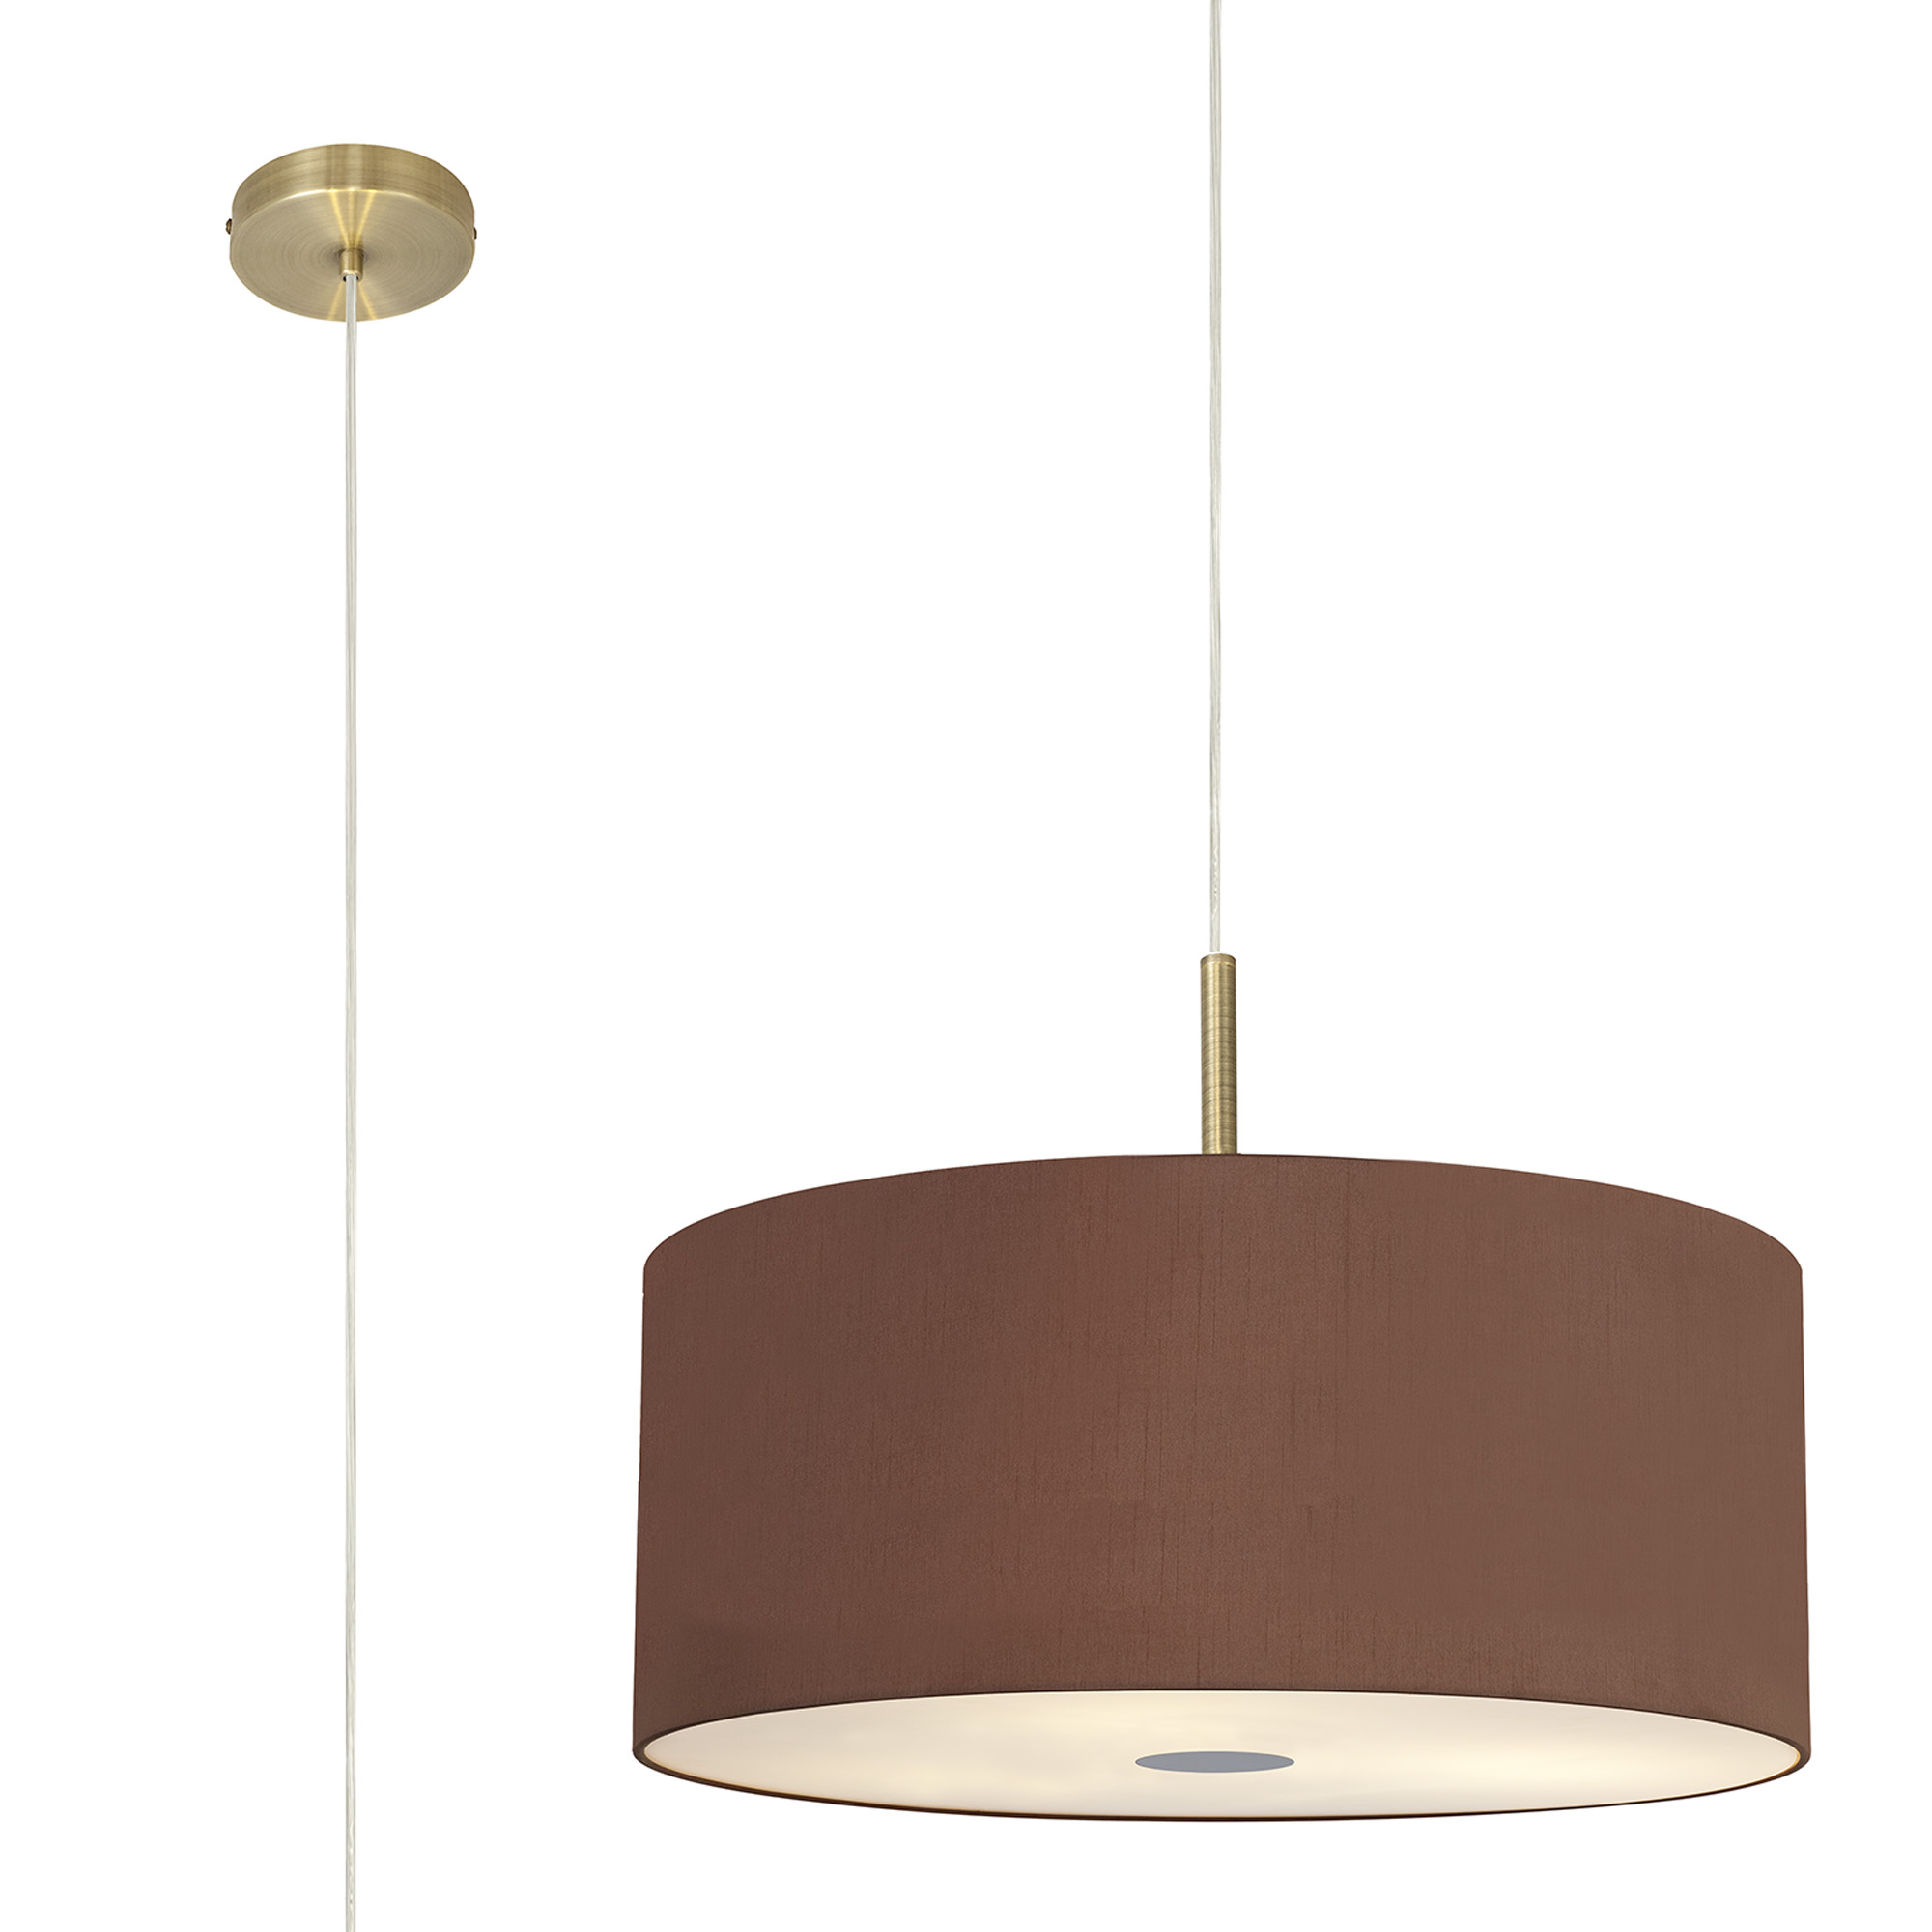 DK0520  Baymont 60cm 5 Light Pendant Antique Brass, Raw Cocoa/Grecian Bronze, Frosted Diffuser